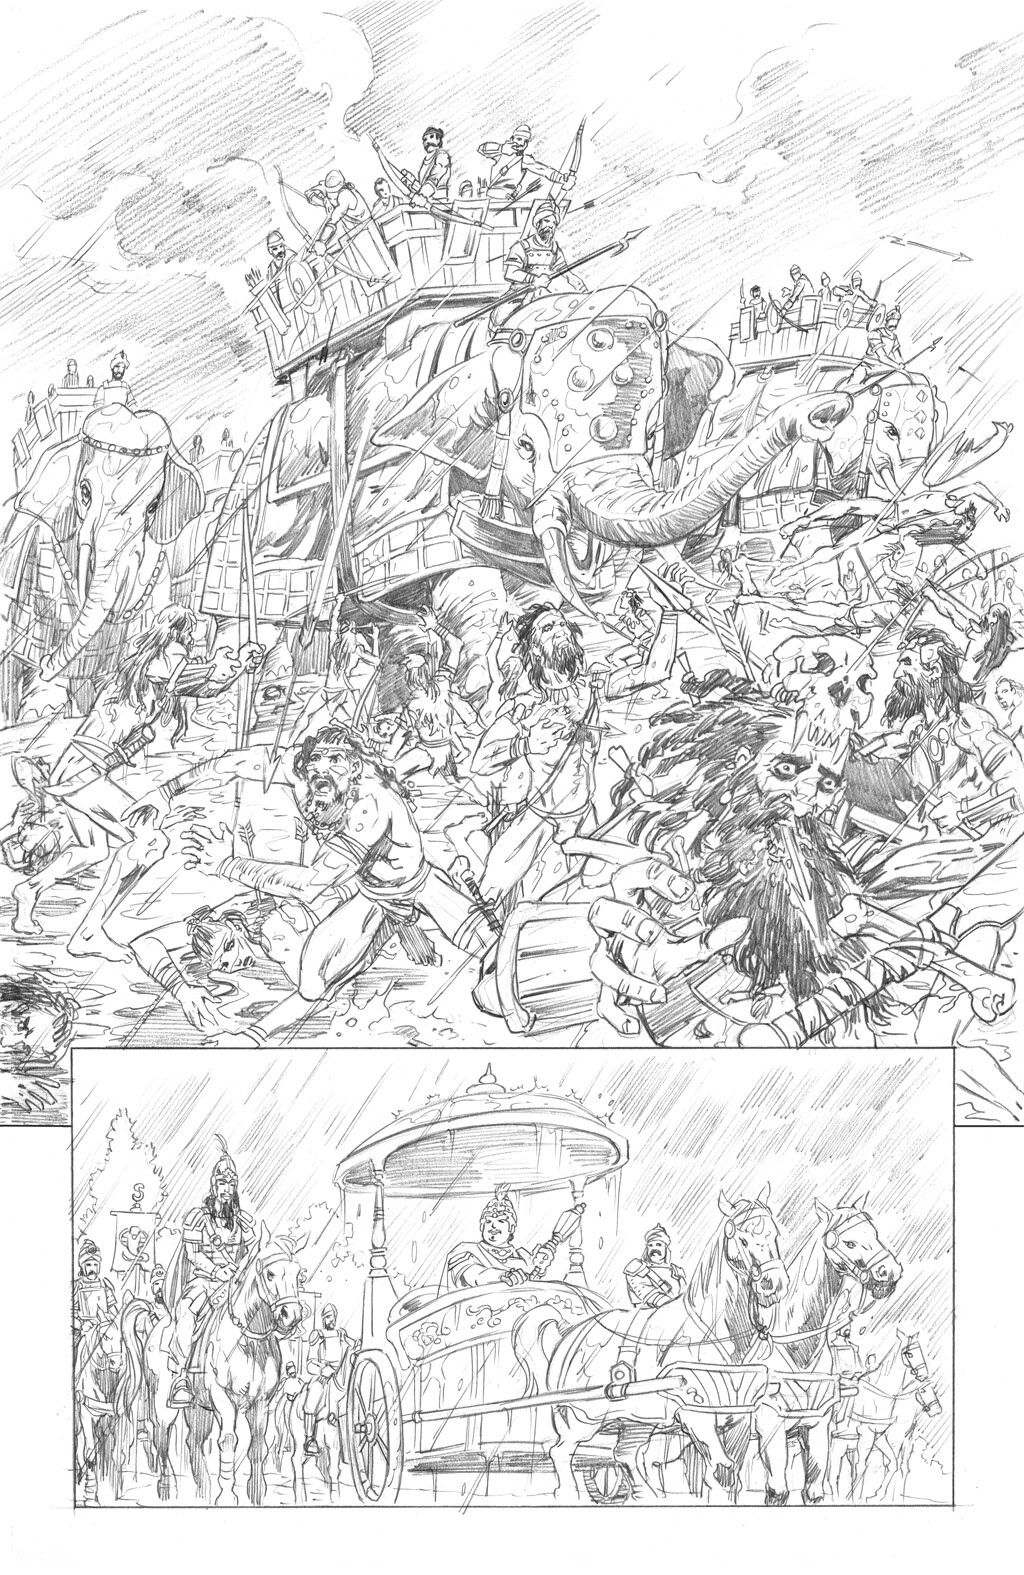 Scions of the Cursed King #2
Page 3 pencils